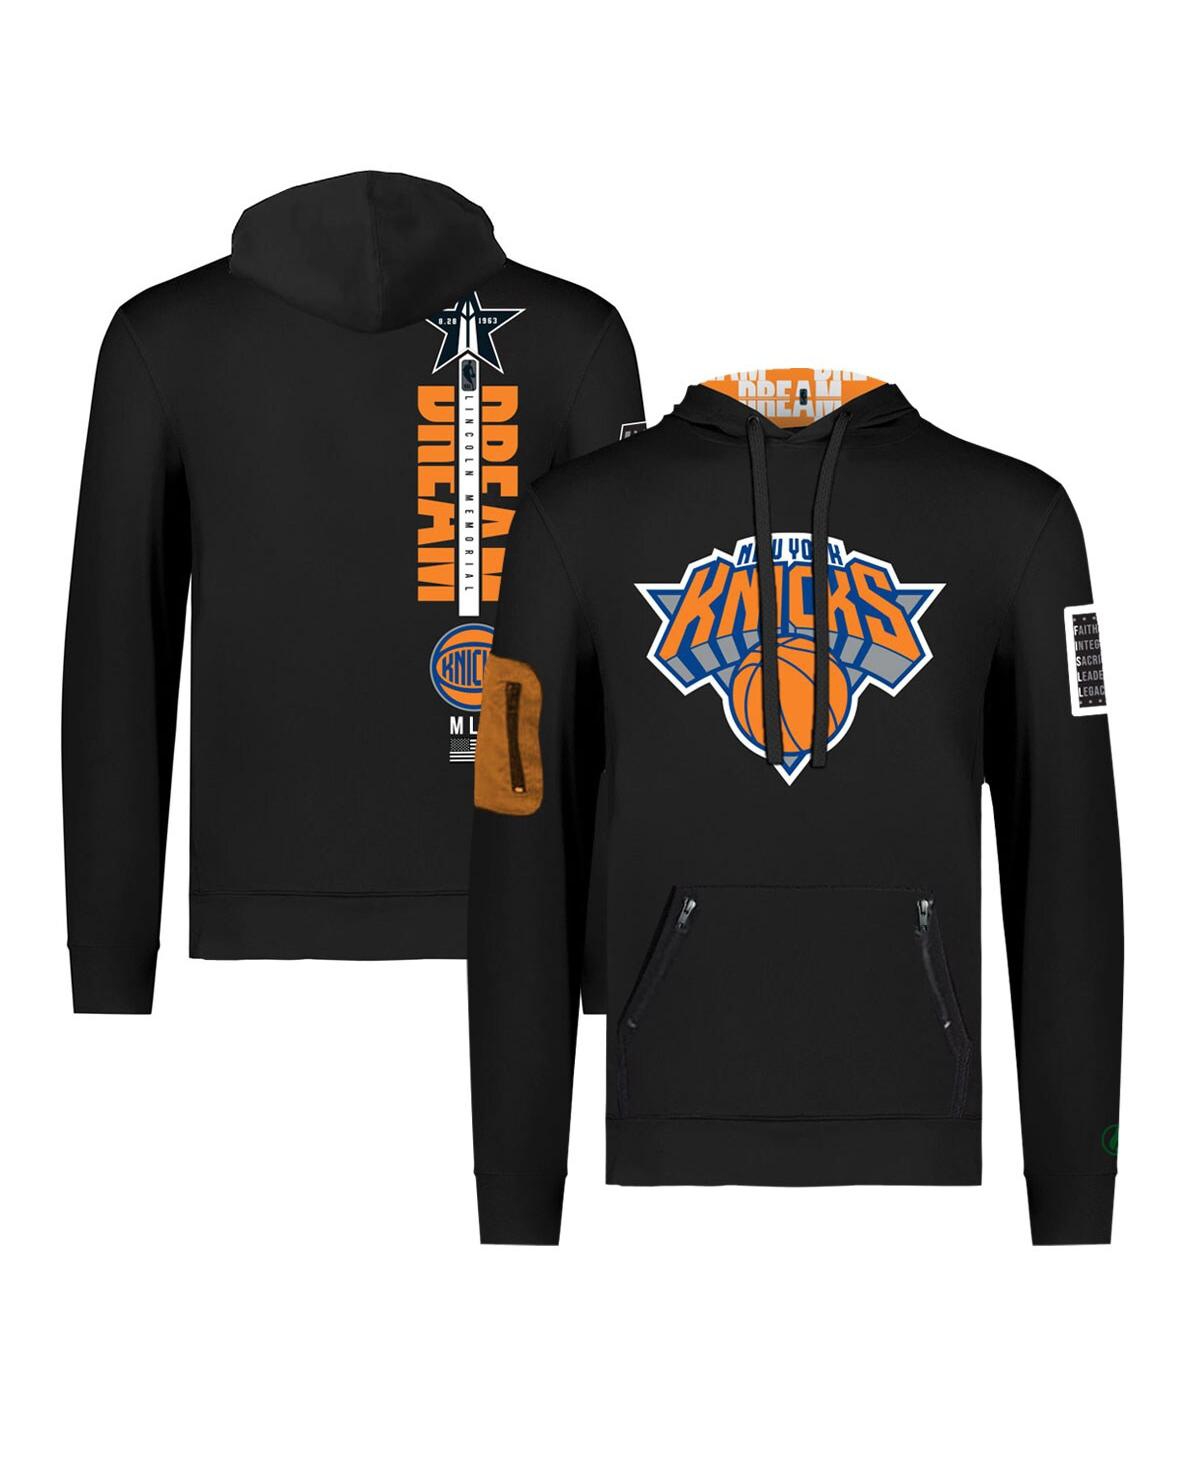 Men's and Women's Fisll x Black History Collection Black New York Knicks Pullover Hoodie - Black